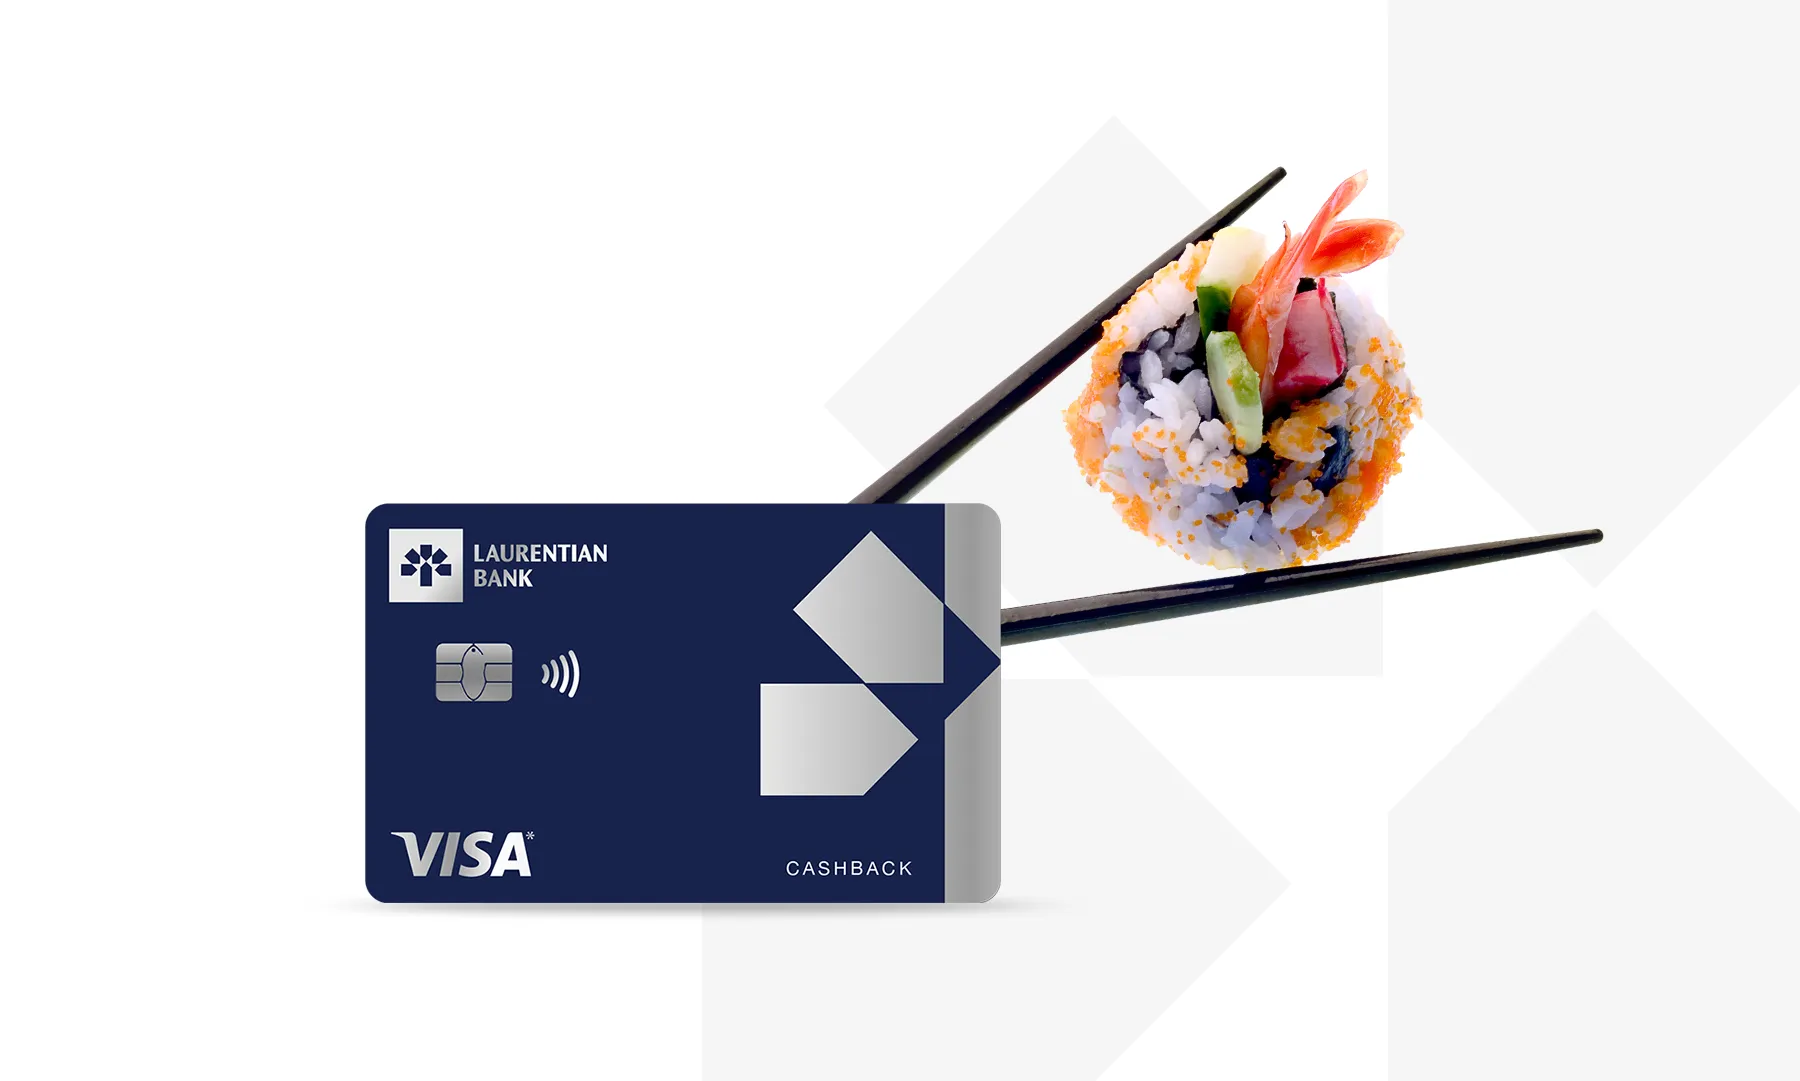 Laurentian Bank Visa* Cashback credit card with a pair of chopsticks holding a sushi roll.